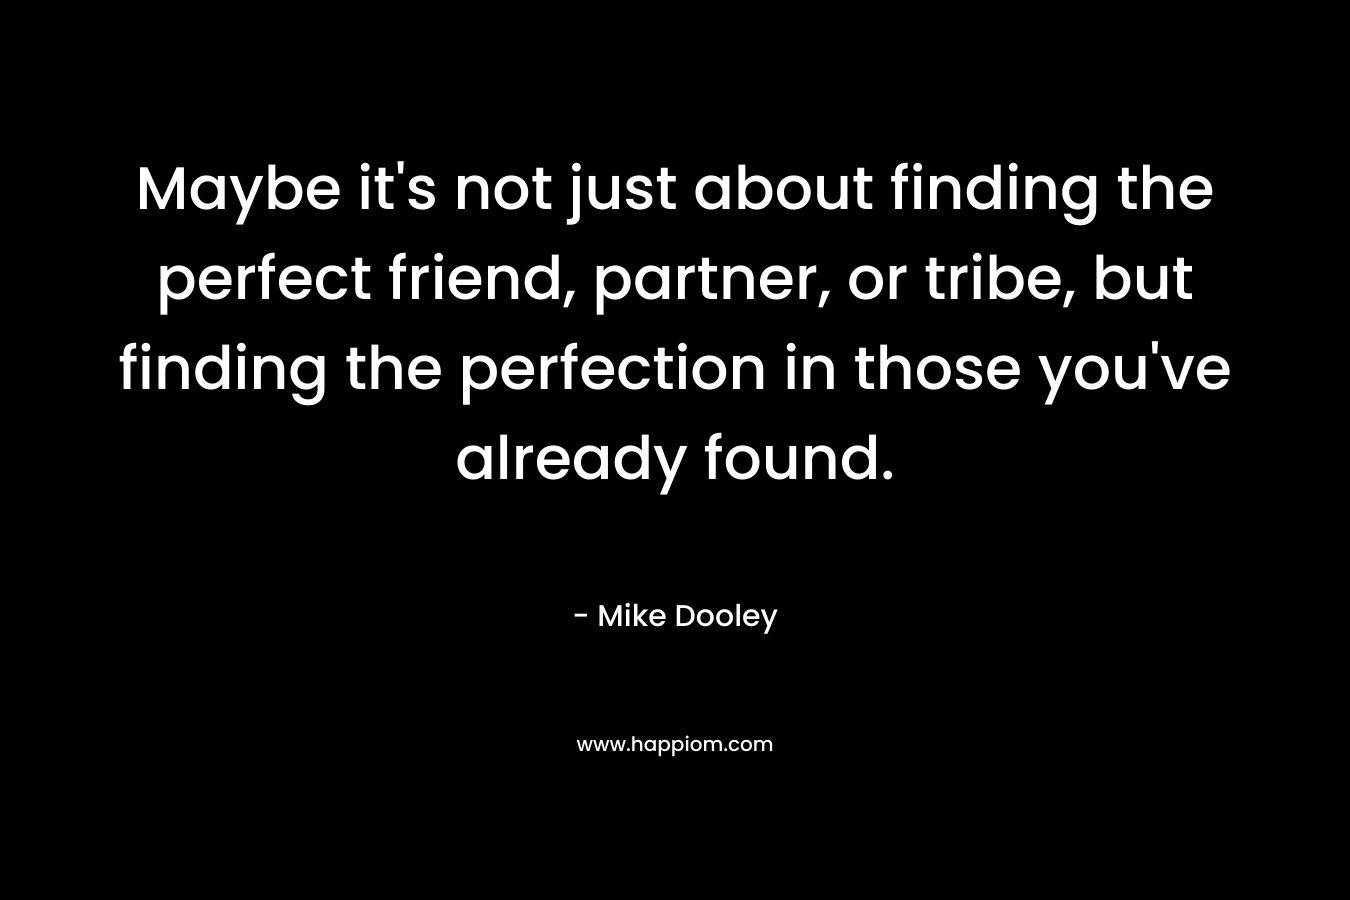 Maybe it’s not just about finding the perfect friend, partner, or tribe, but finding the perfection in those you’ve already found. – Mike Dooley